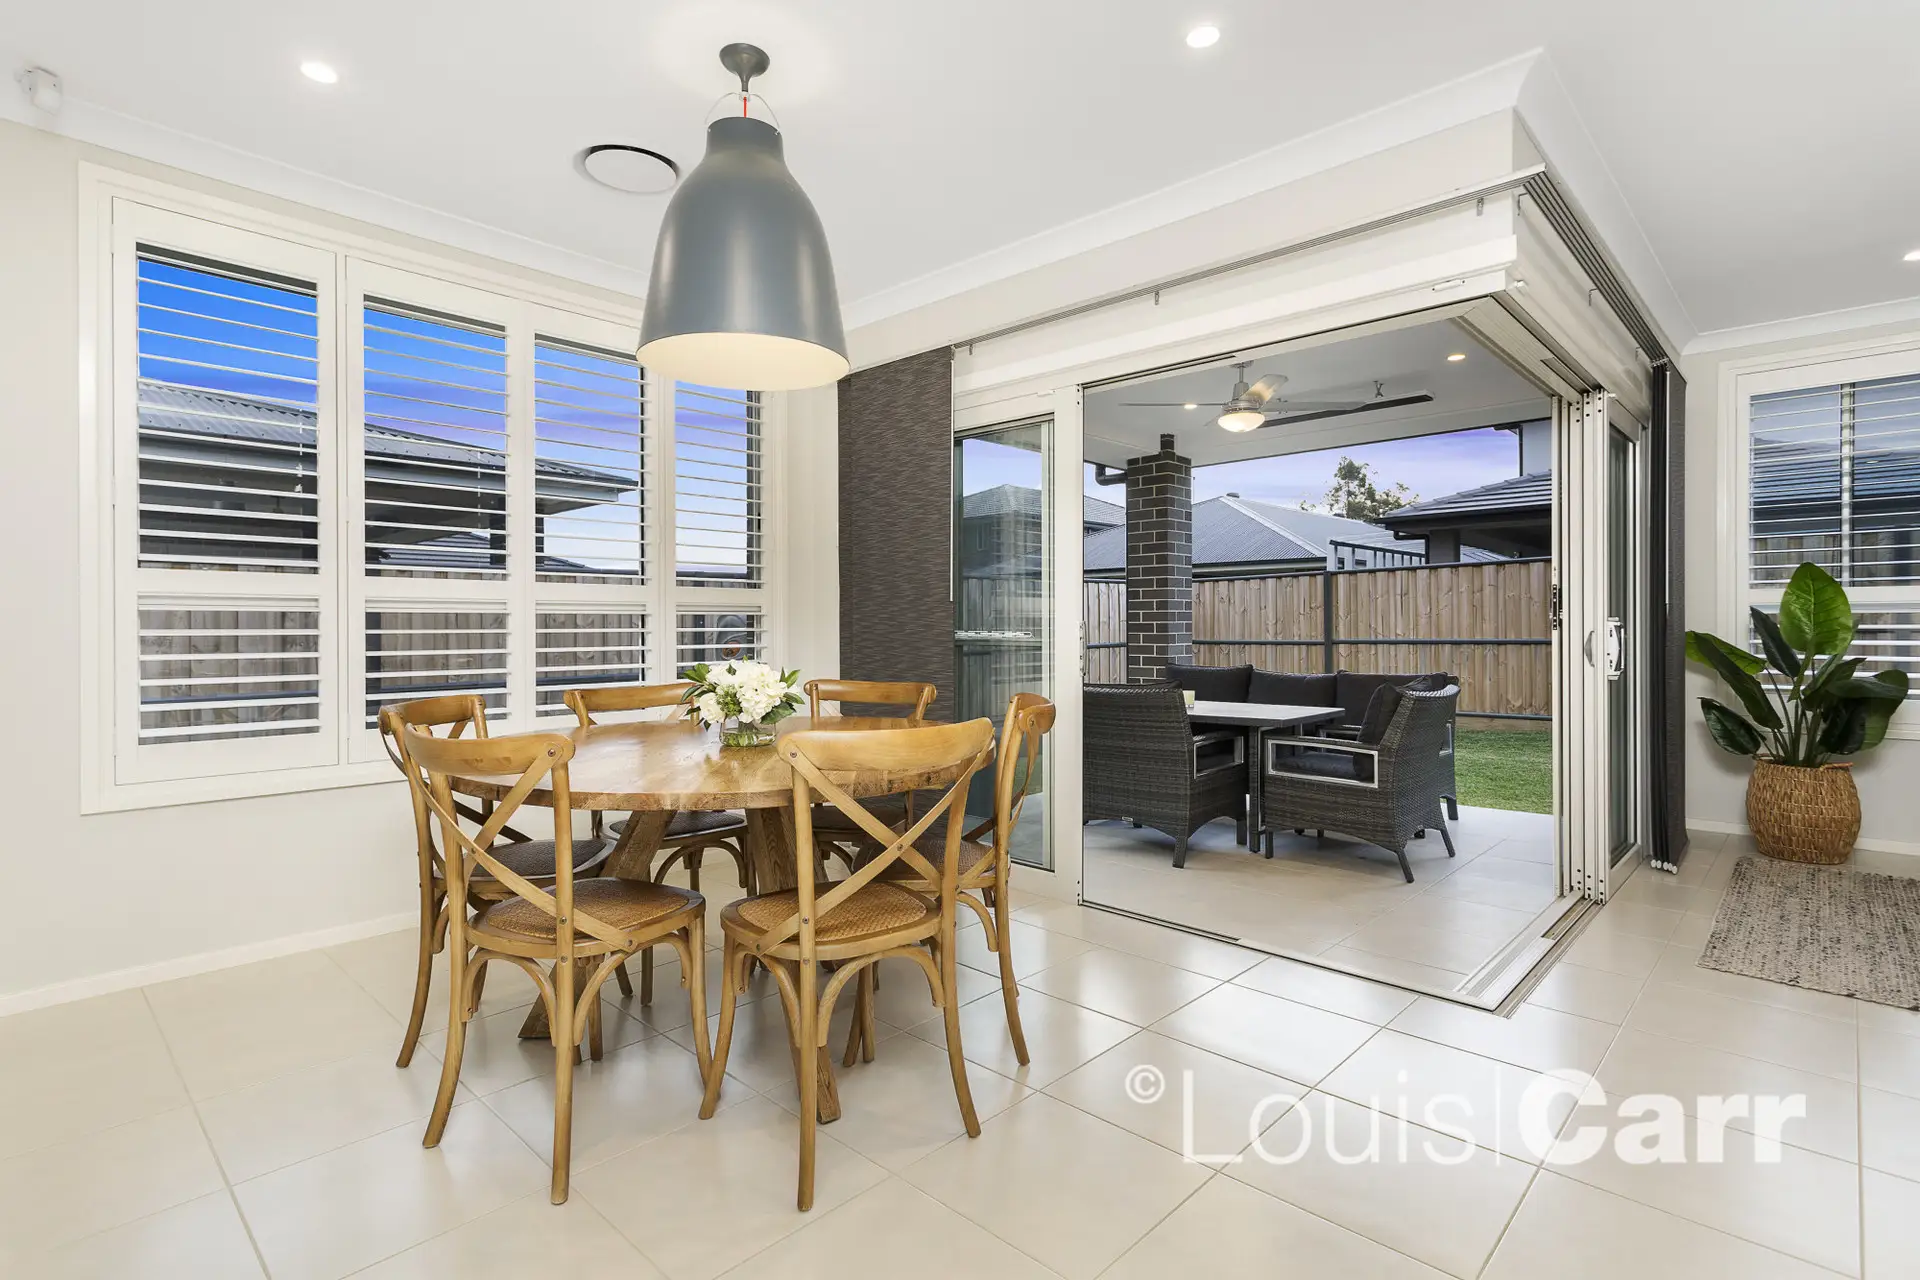 Photo #4: 6 Goongarrie Street, North Kellyville - Sold by Louis Carr Real Estate